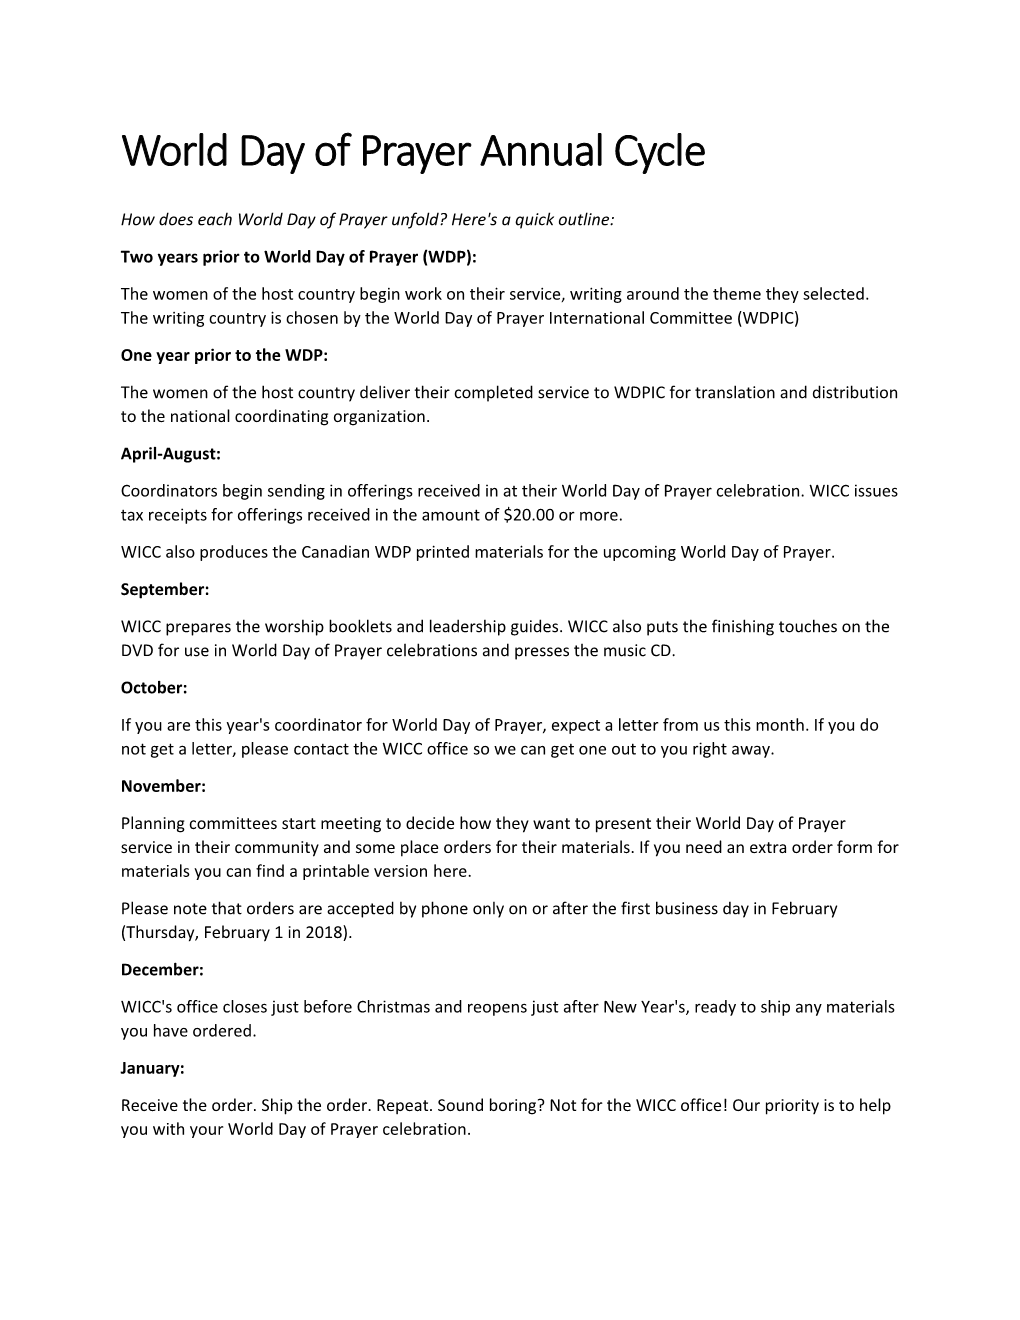 Two Years Prior to World Day of Prayer (WDP)